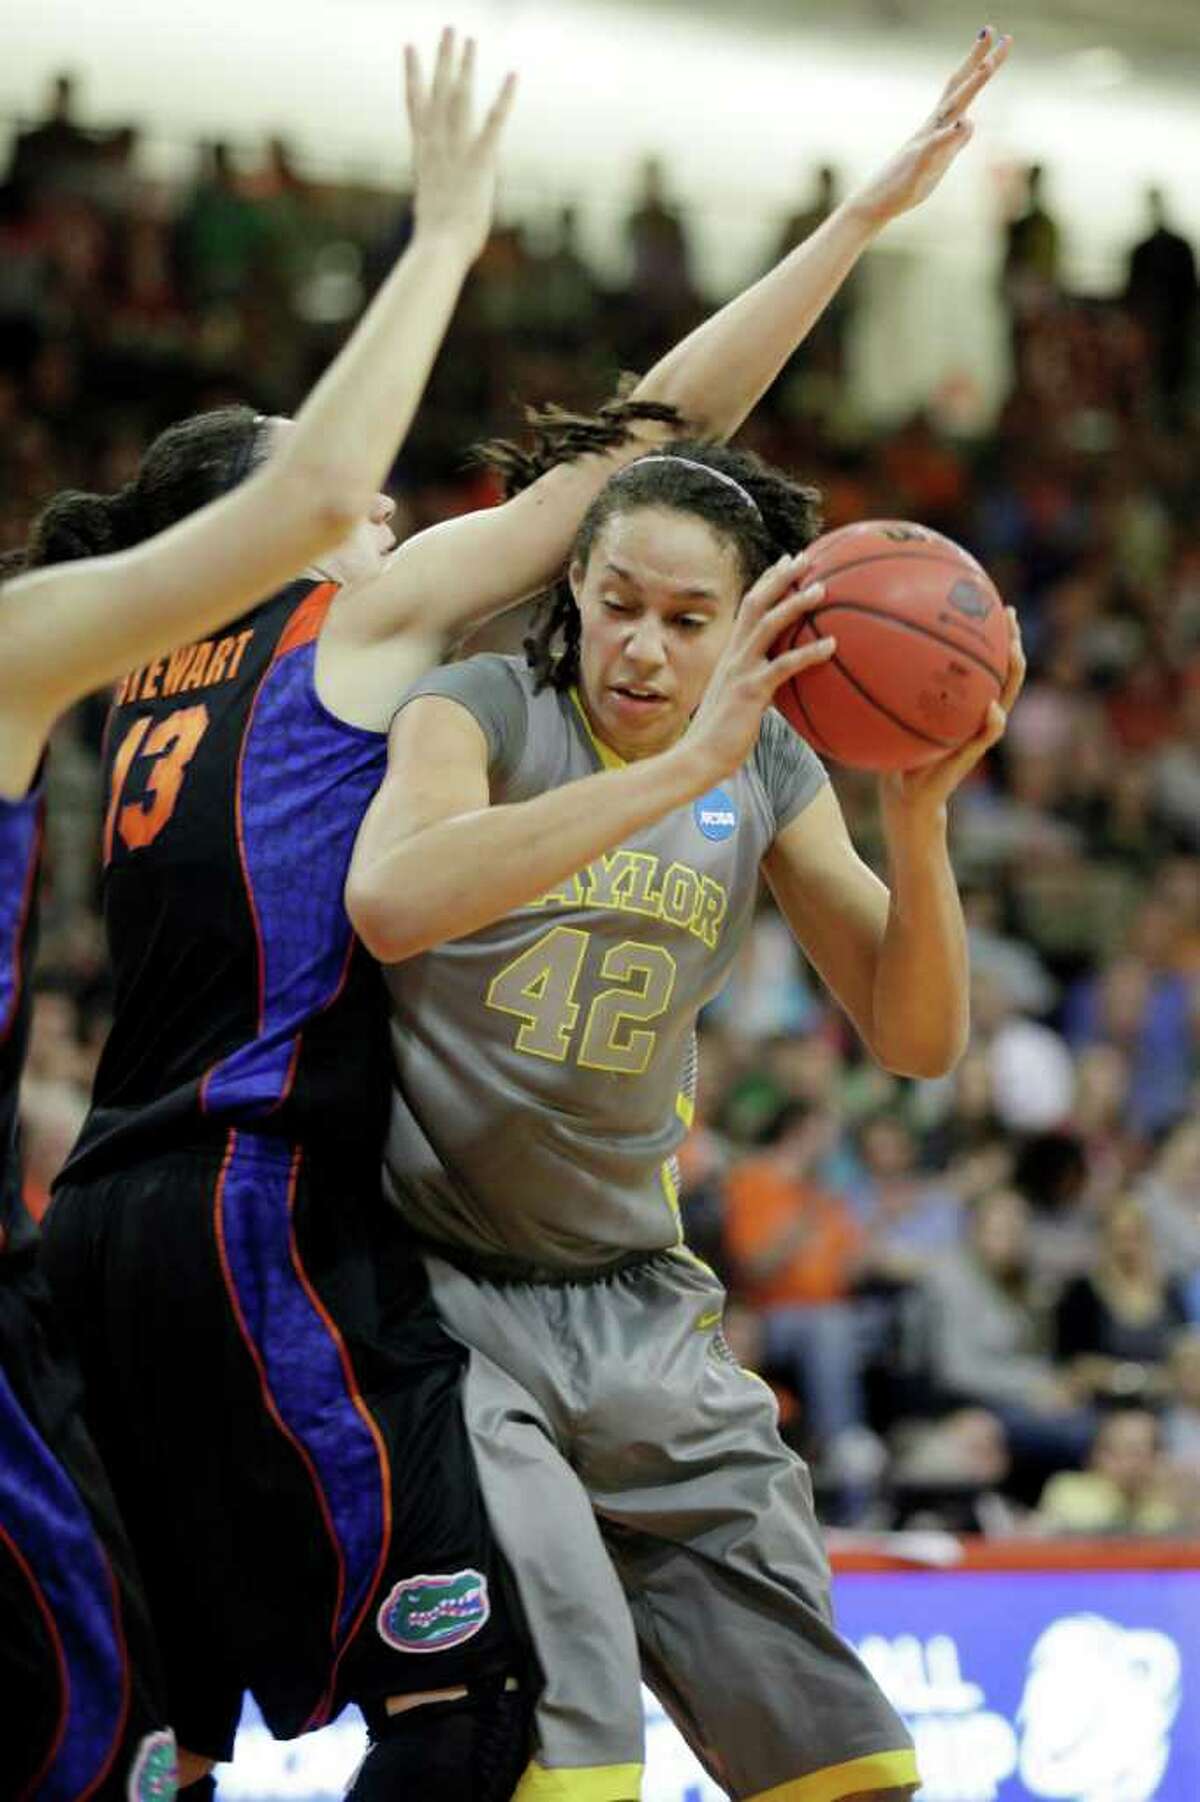 Baylor's Brittney Griner (42) makes a move in the lane against Florida's Azania Stewart (13) during the first half of a second-round NCAA women's tournament college basketball game, Tuesday, March 20, 2012, in Bowling Green, Ohio. (AP Photo/J.D. Pooley)